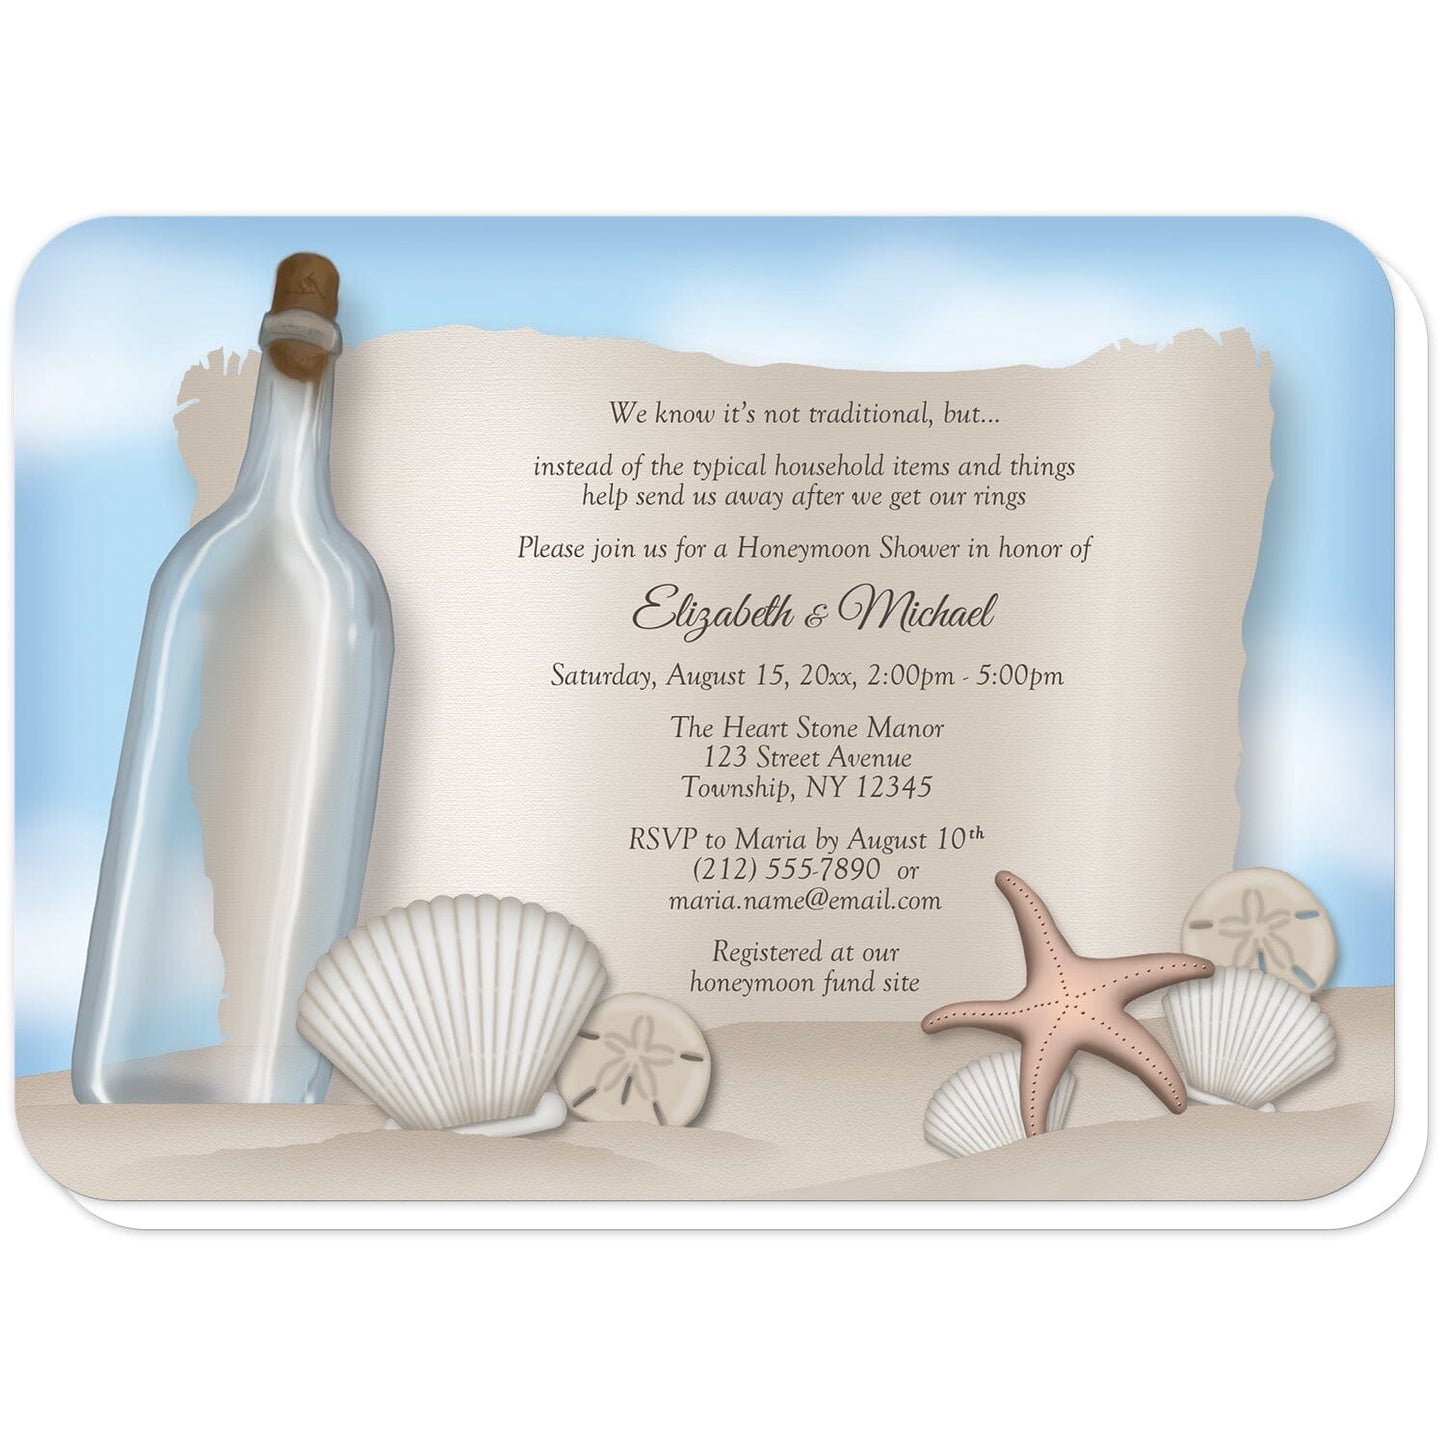 Message from a Bottle Beach Honeymoon Shower Invitations (with rounded corners) at Artistically Invited. Message from a bottle beach honeymoon shower invitations with an "on the beach" and "message from a bottle" theme. They're designed with an illustrated empty glass bottle, a paper message area, beige sand, a blue sky, and assorted seashells. Your personalized honeymoon shower celebration details are custom printed in brown over the paper illustration.